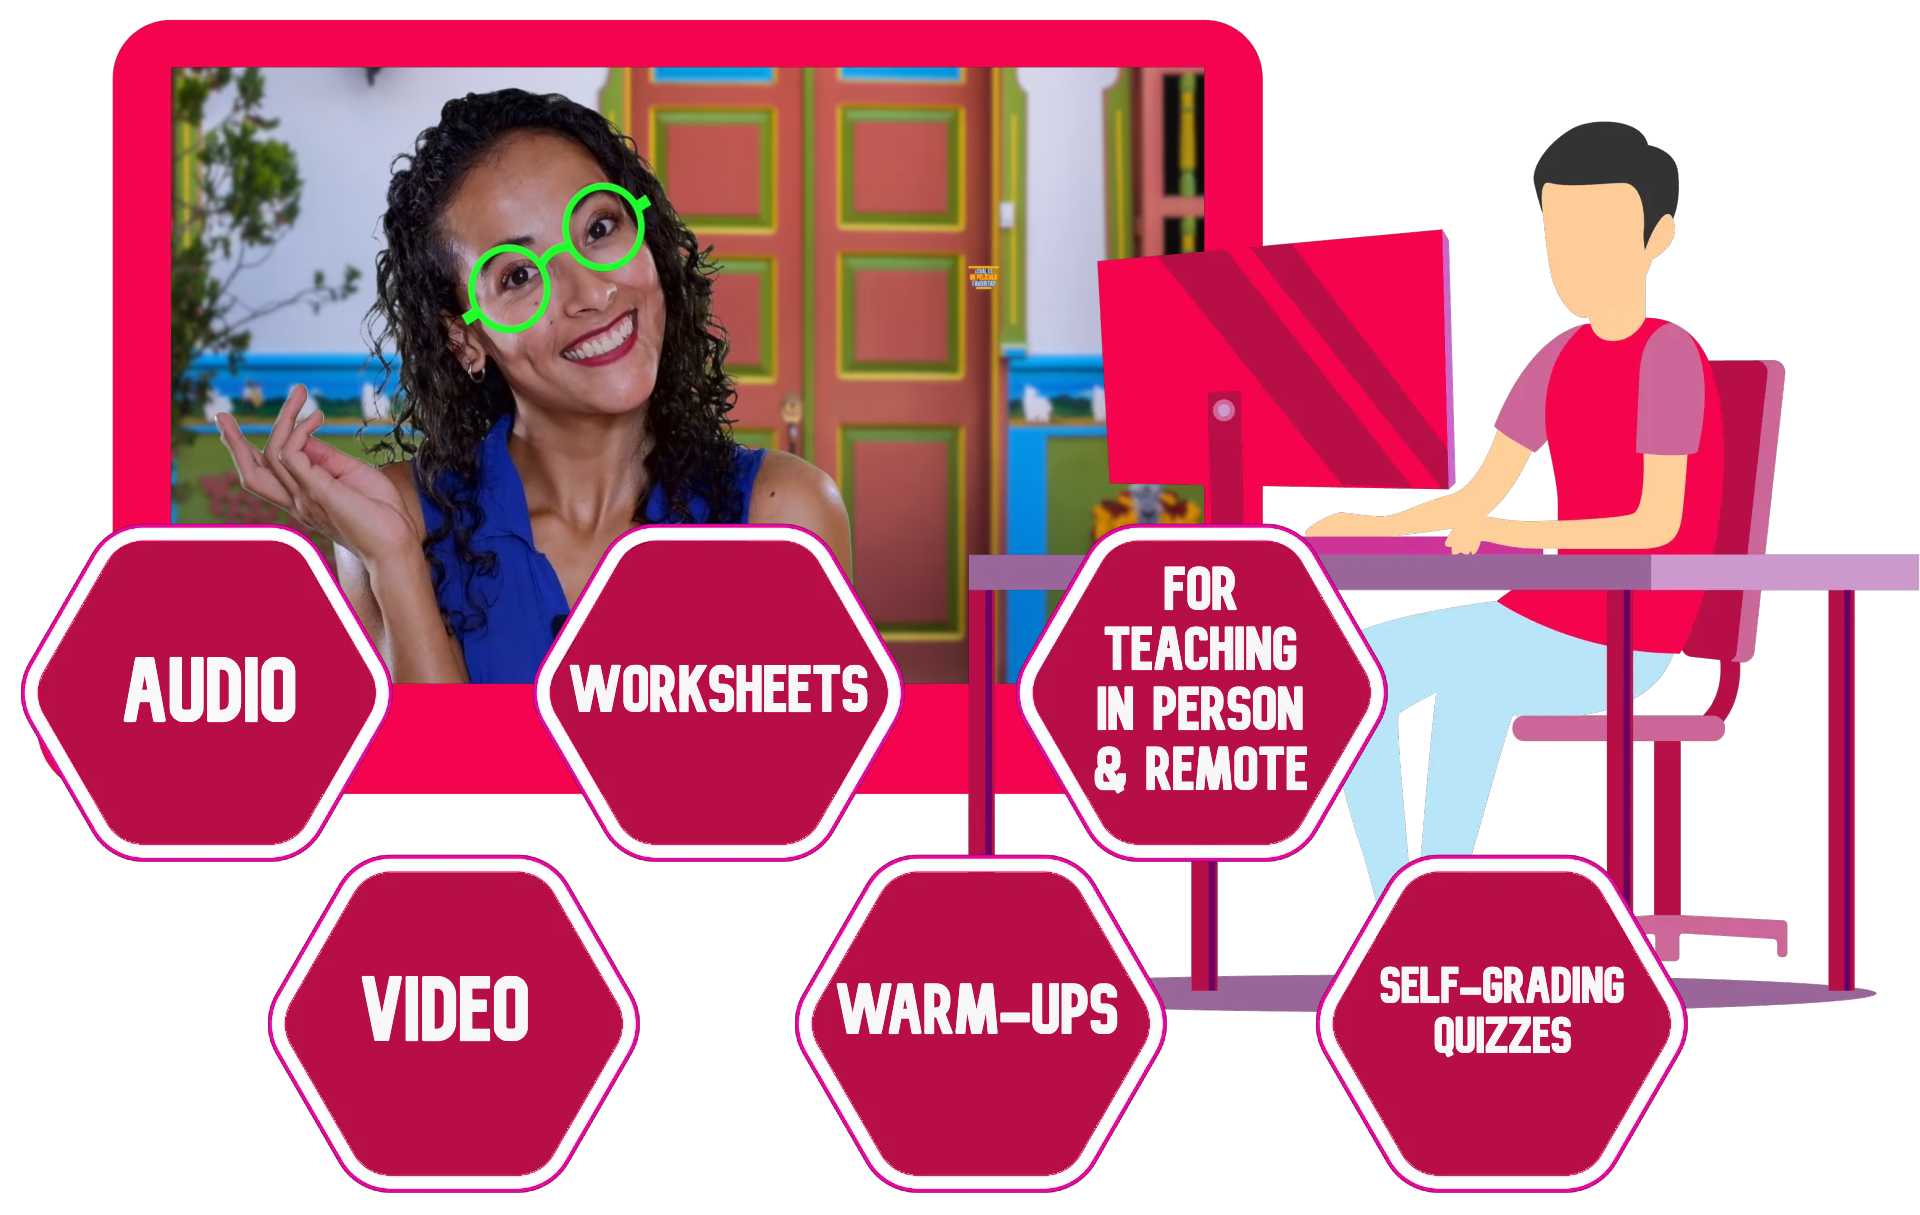 A Spanish student access a full lesson that includes a video, worksheets, audio and much more